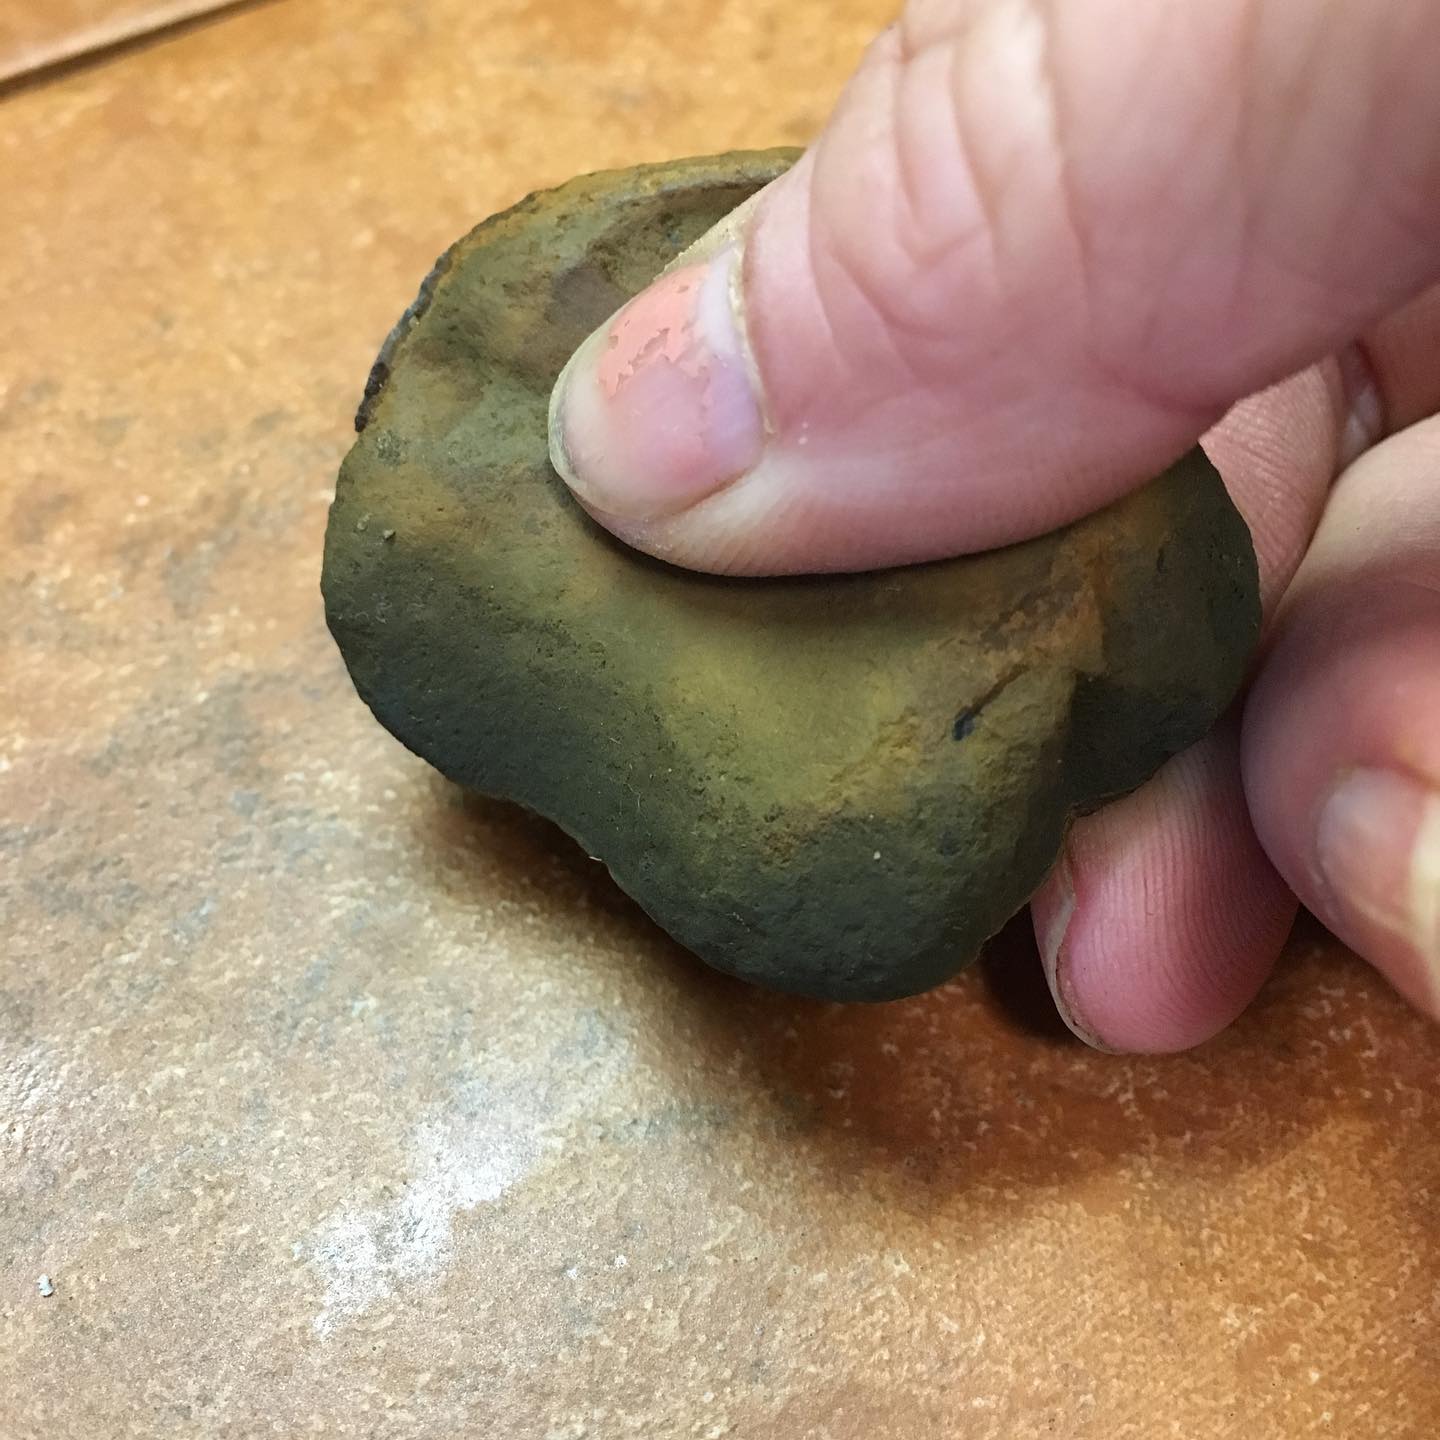 While out gathering earth pigments, I found this rock that might have once been used as a tool.